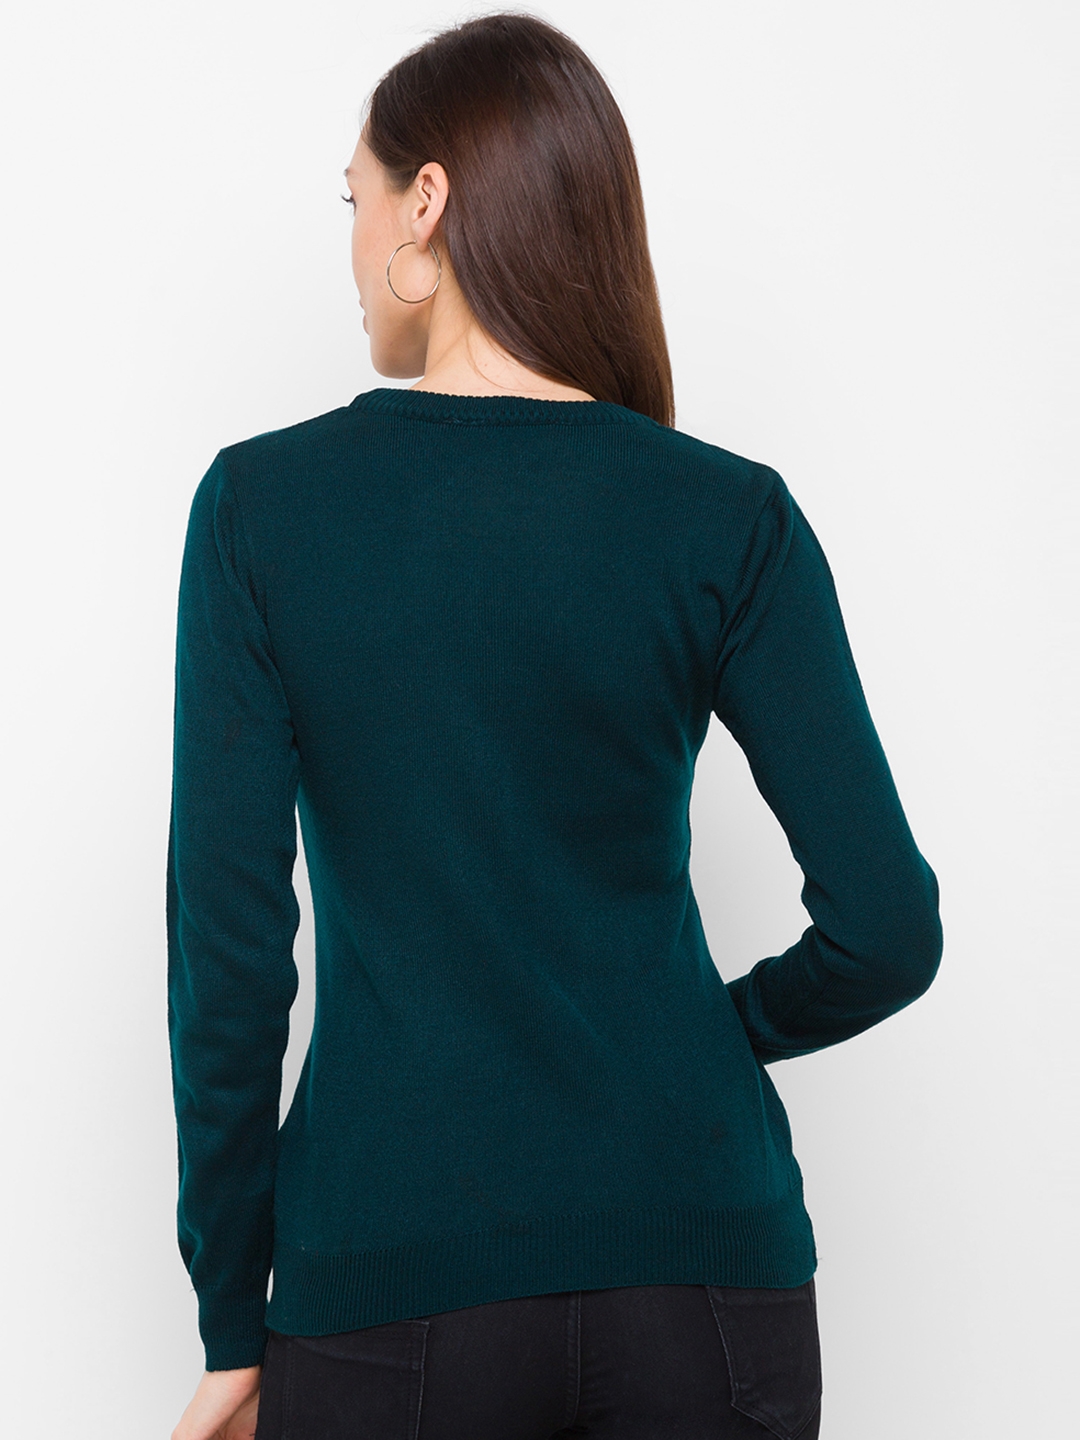 Green Solid Sweater